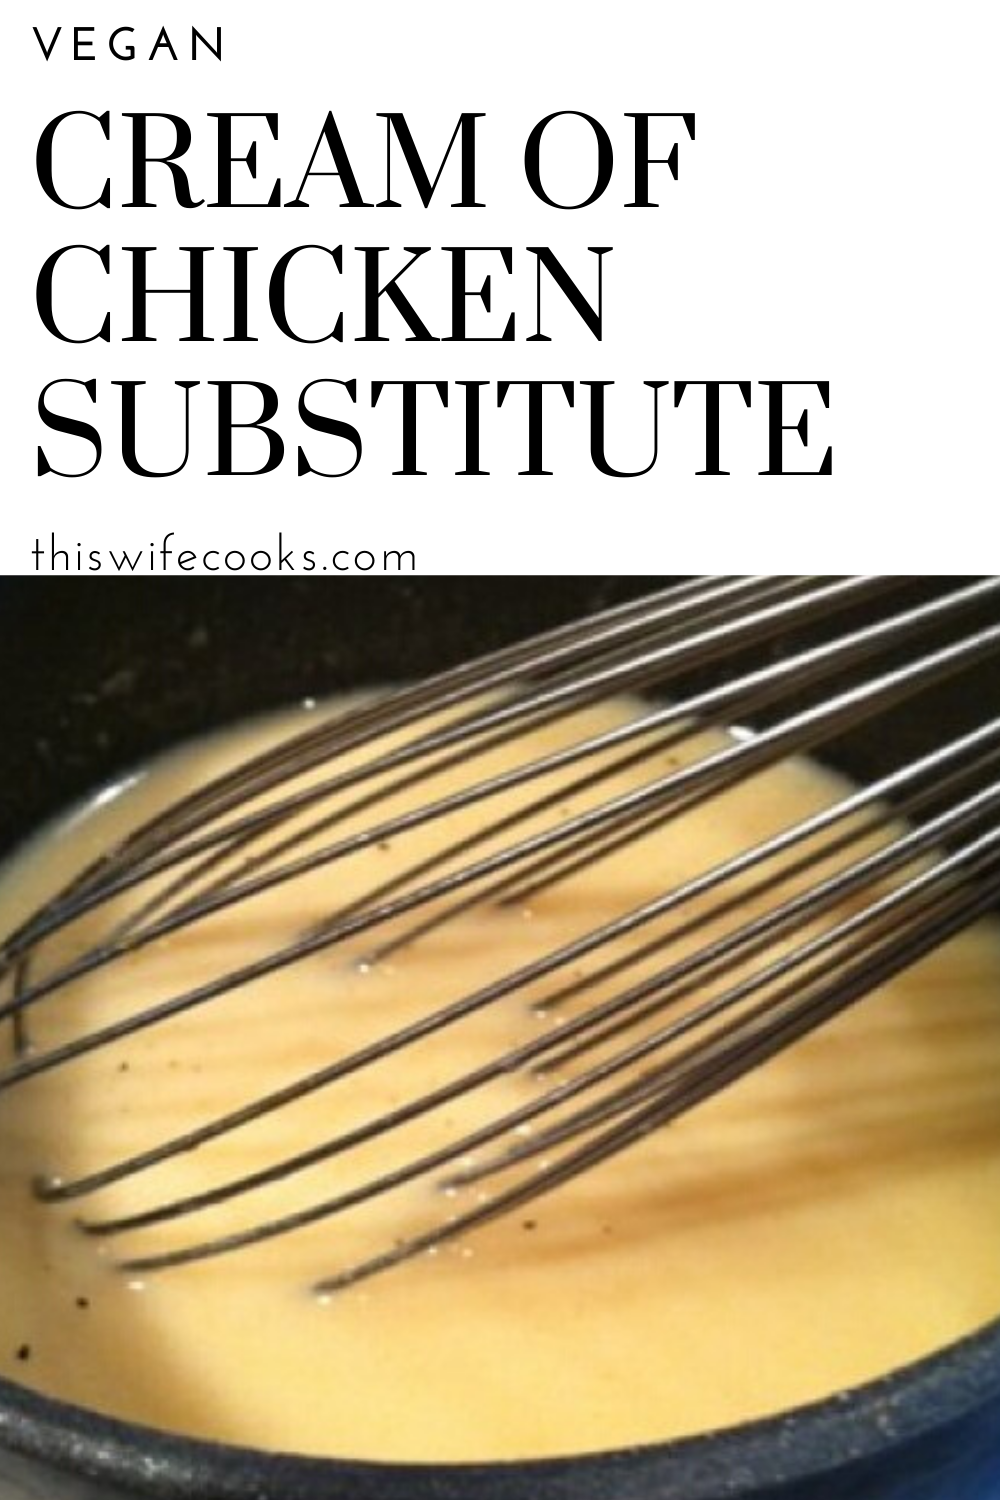 Vegan Cream of Chicken Substitute - Got a recipe calling for a can of cream of chicken soup? This is quick, easy, and yields the equivalent of one can of soup. via @thiswifecooks